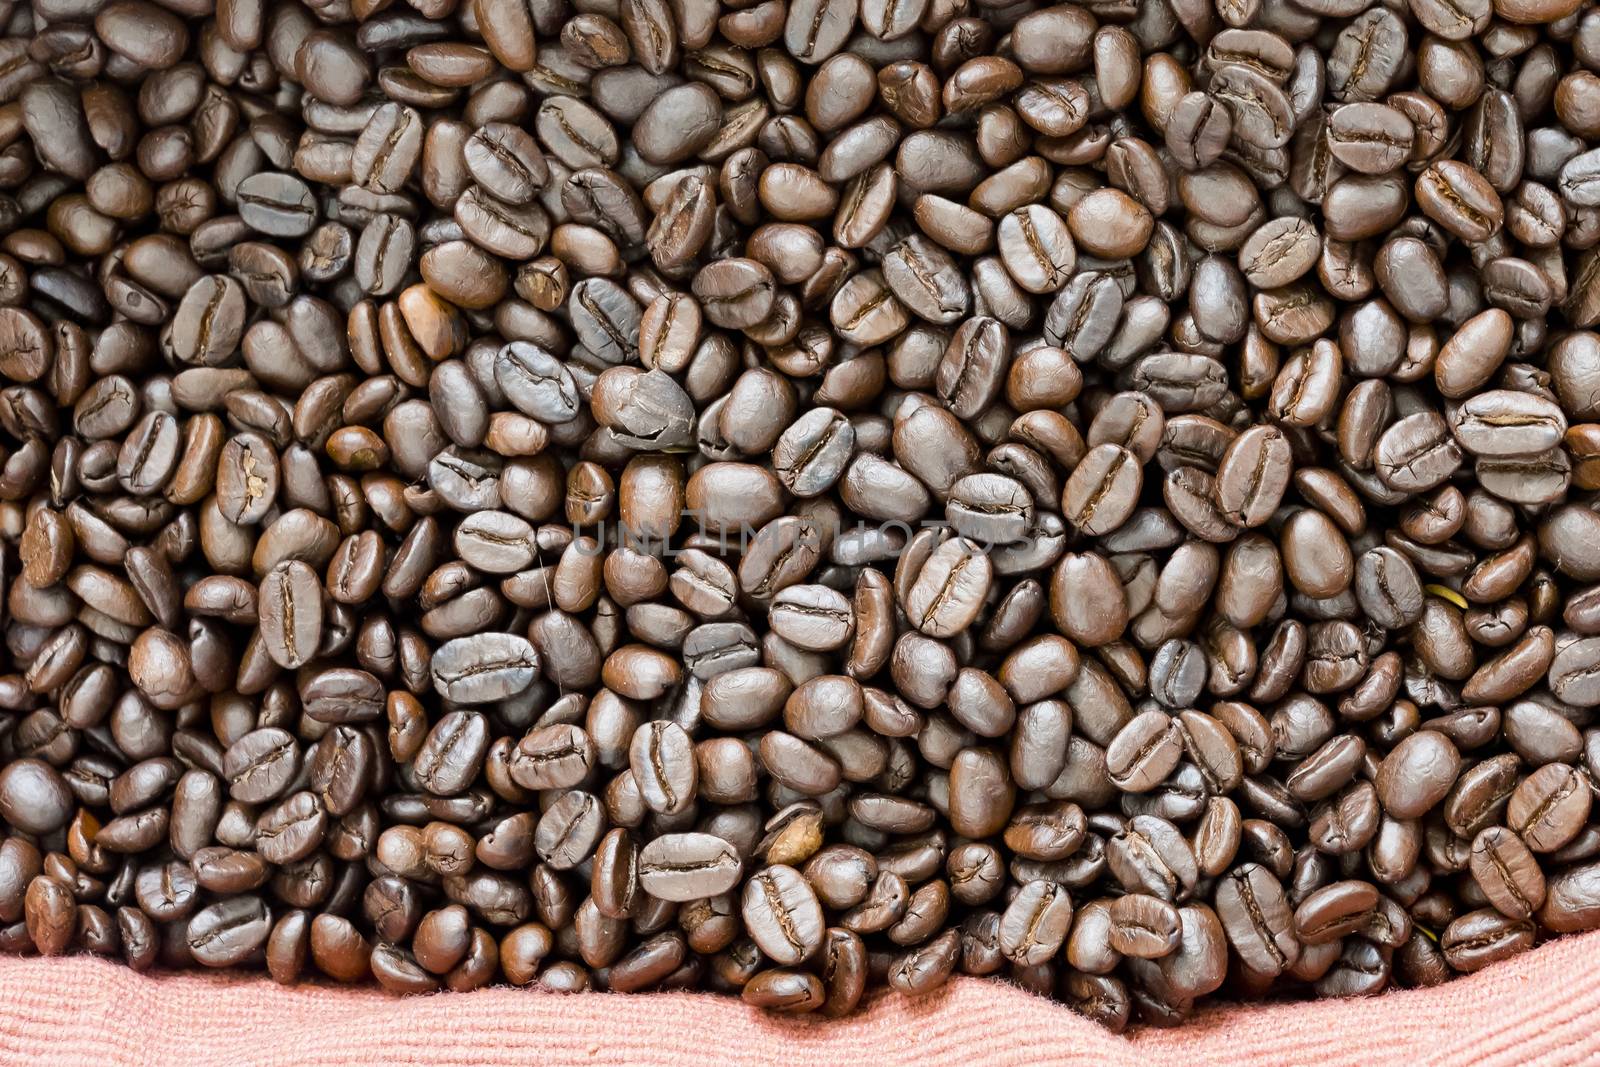 Coffee beans background texture